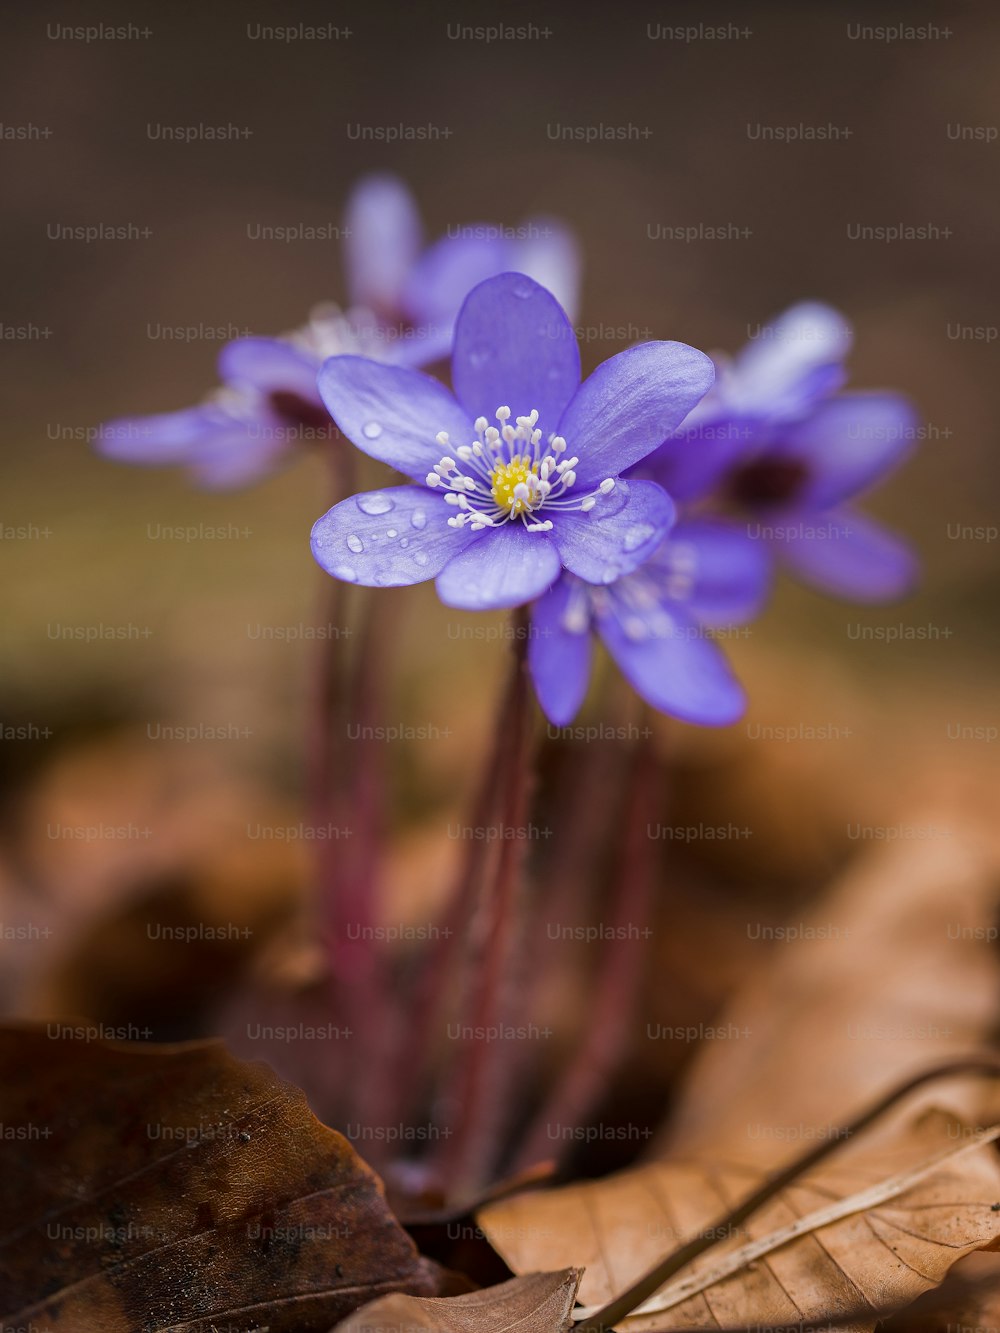 a close up of a purple flower on the ground